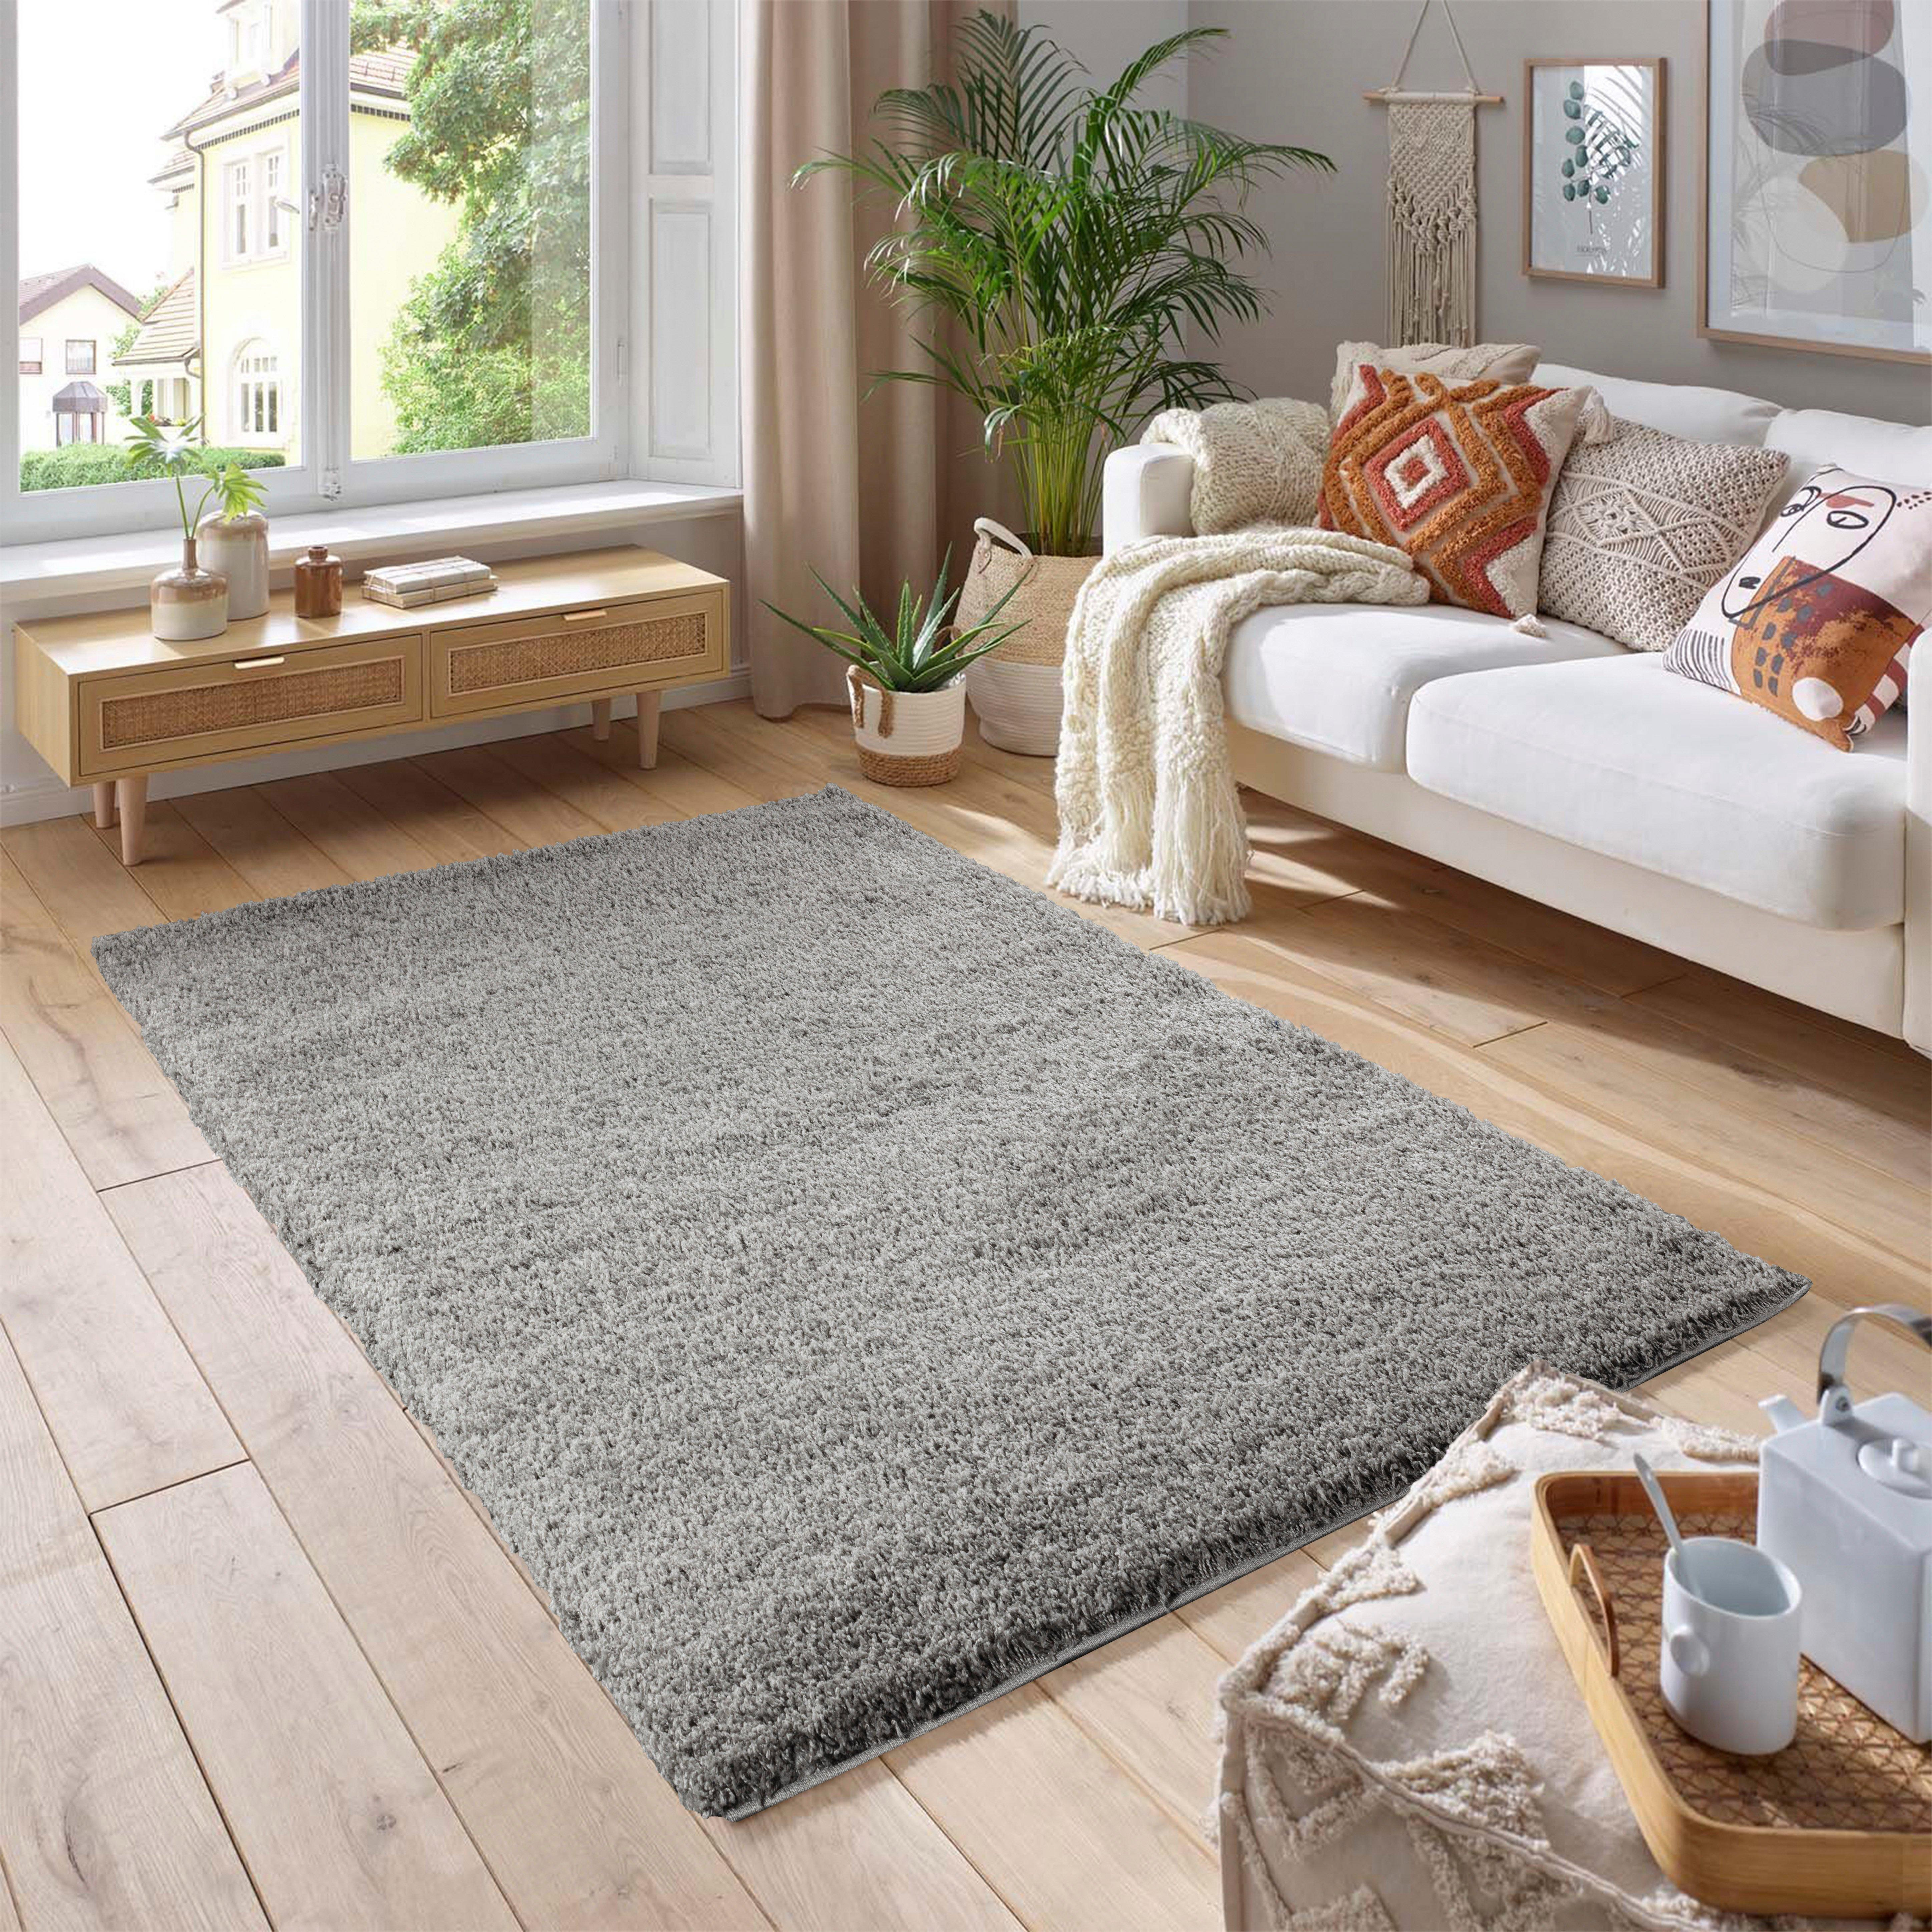 Soft Fluffy 5cm Thick Pile Shaggy Area Rugs for Living Room, Bedroom - image 1